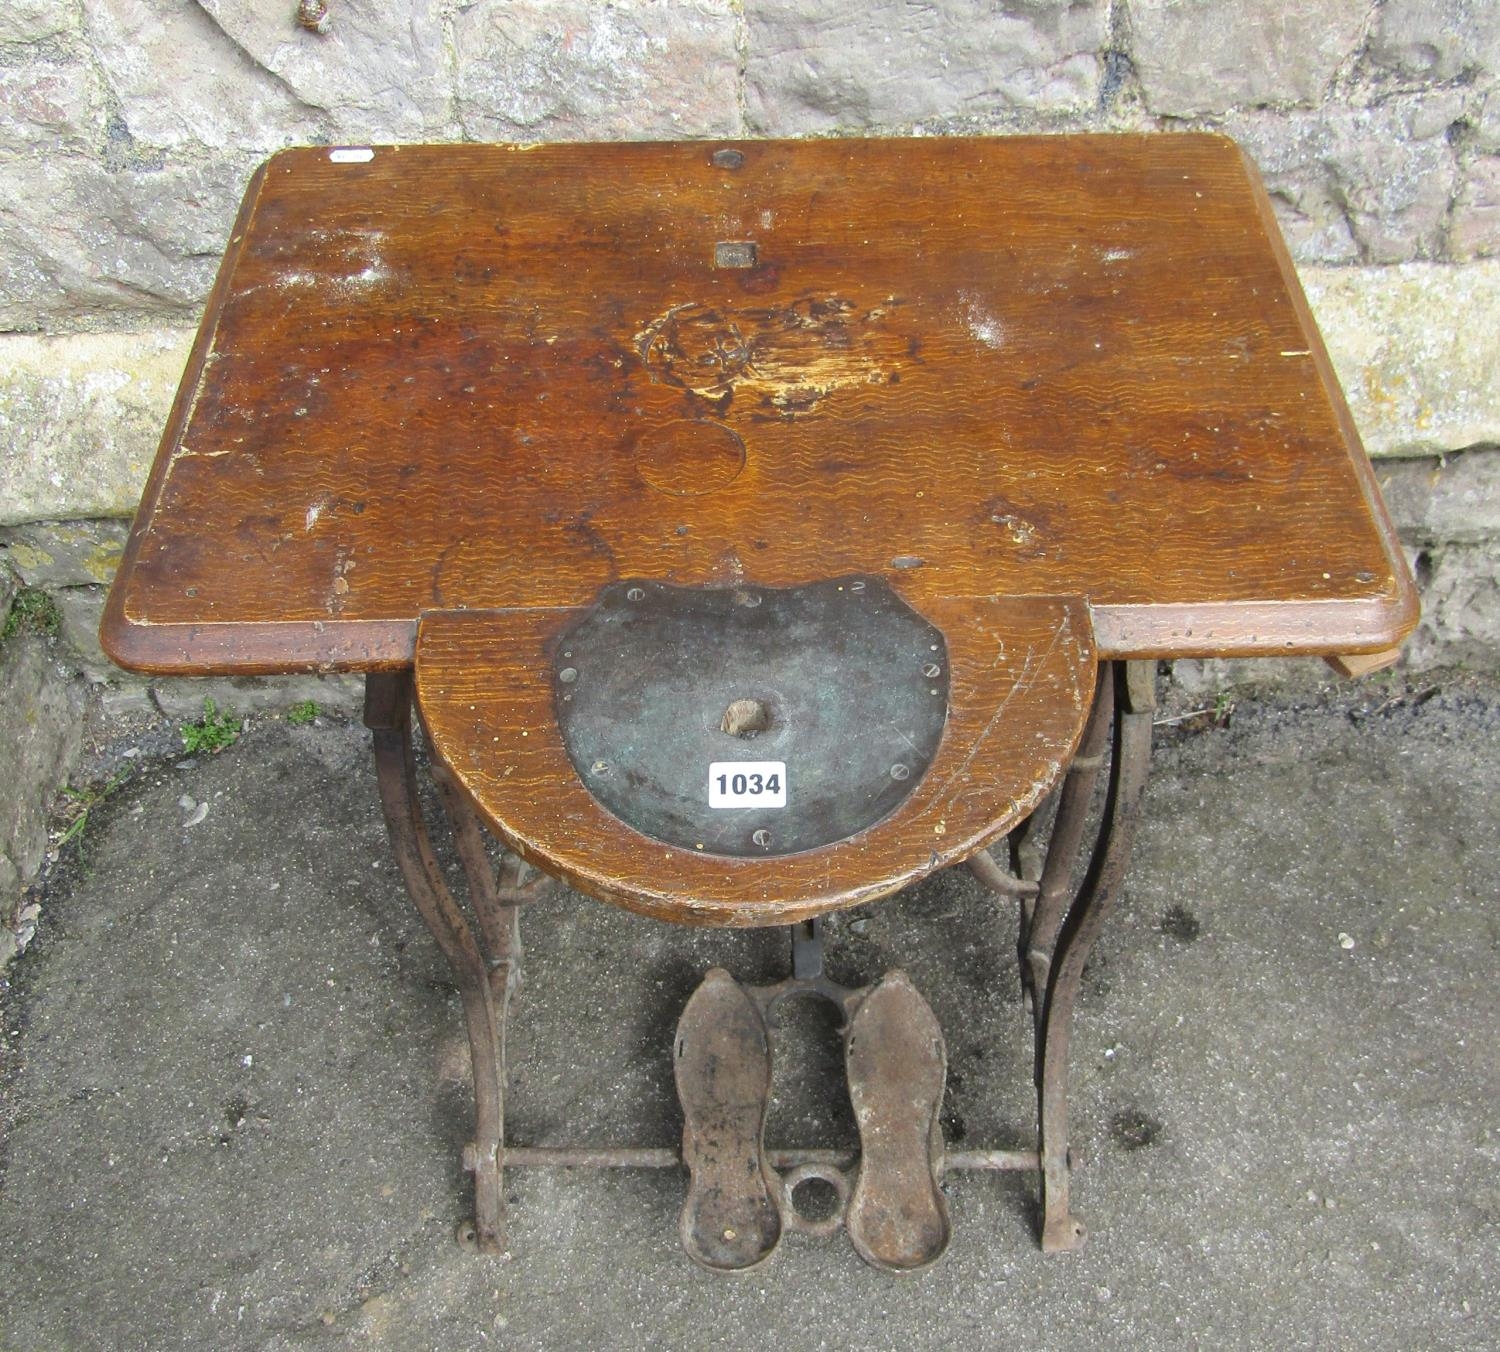 A vintage cast iron treadle sewing machine base with scumbled wooden top - Image 2 of 4